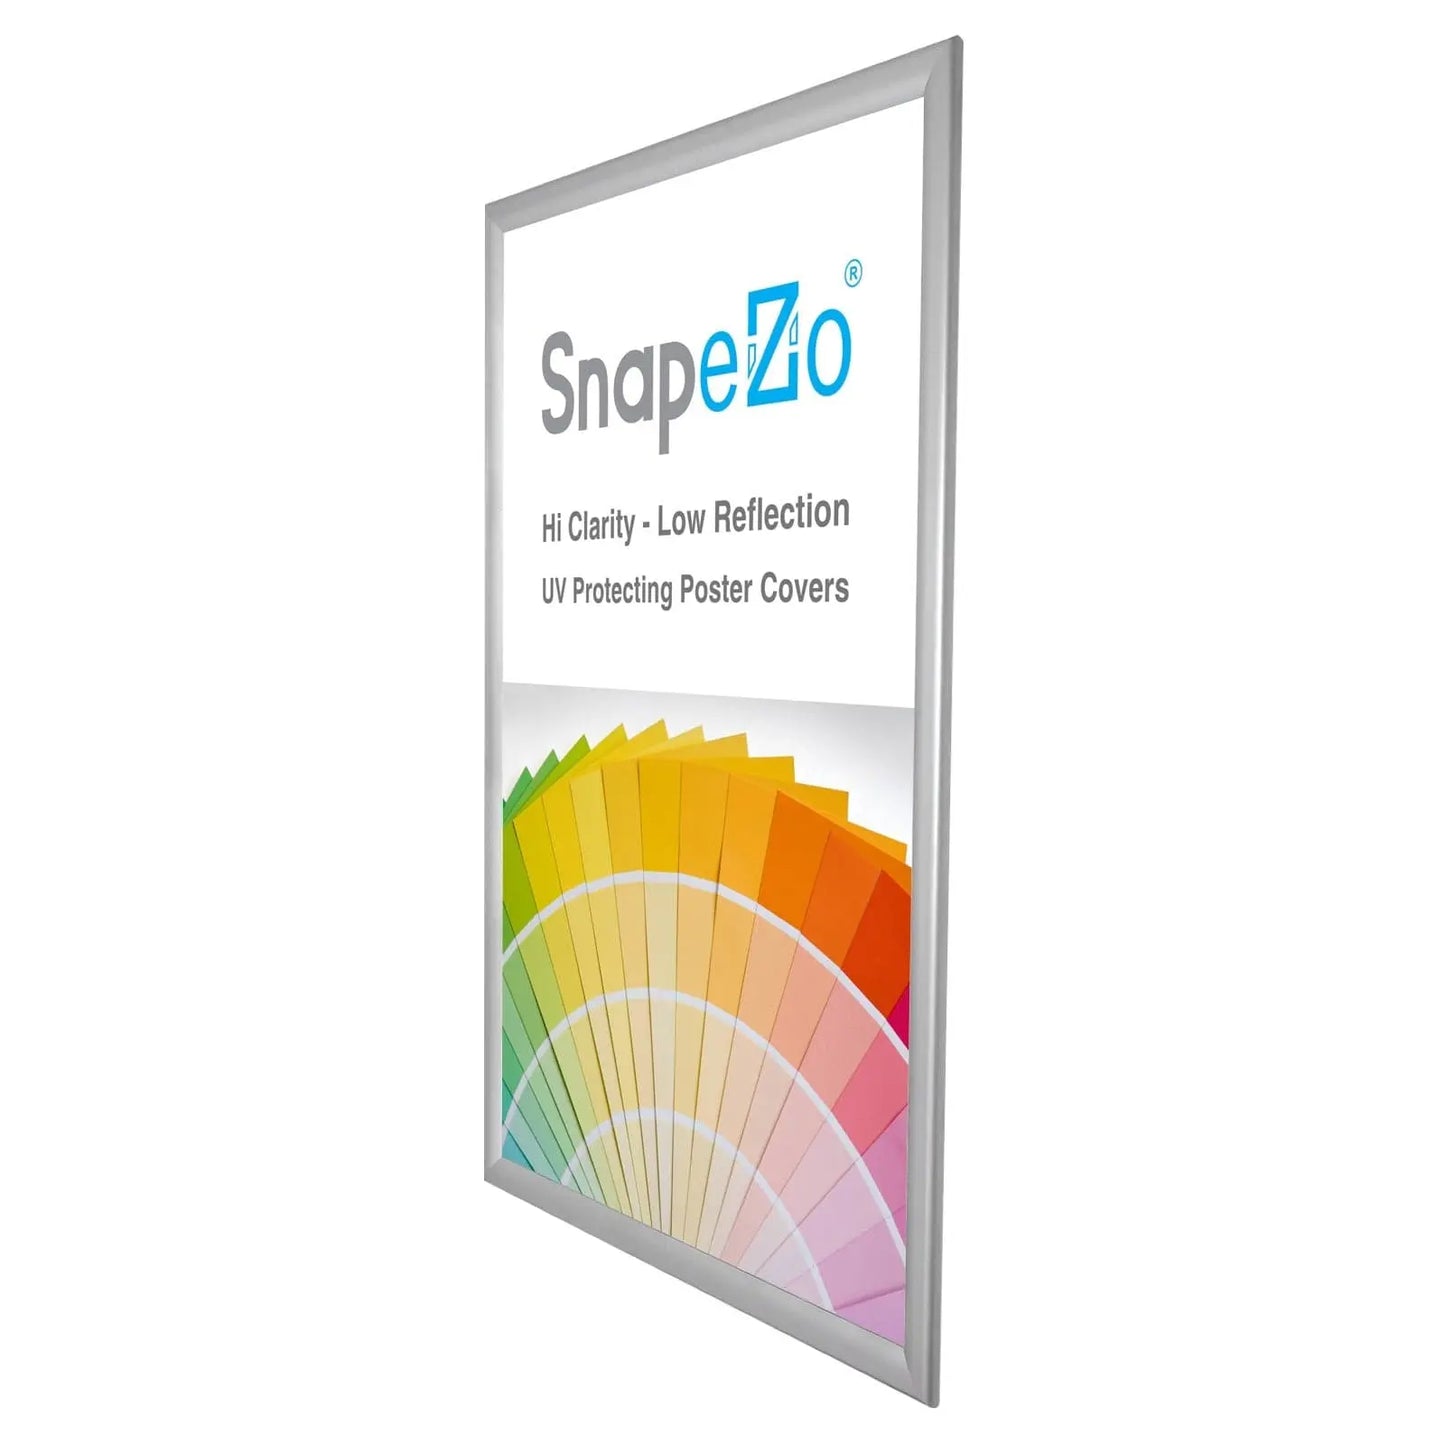 20x30 Silver SnapeZo® Weather Resistant - 1.38" Profile - Snap Frames Direct